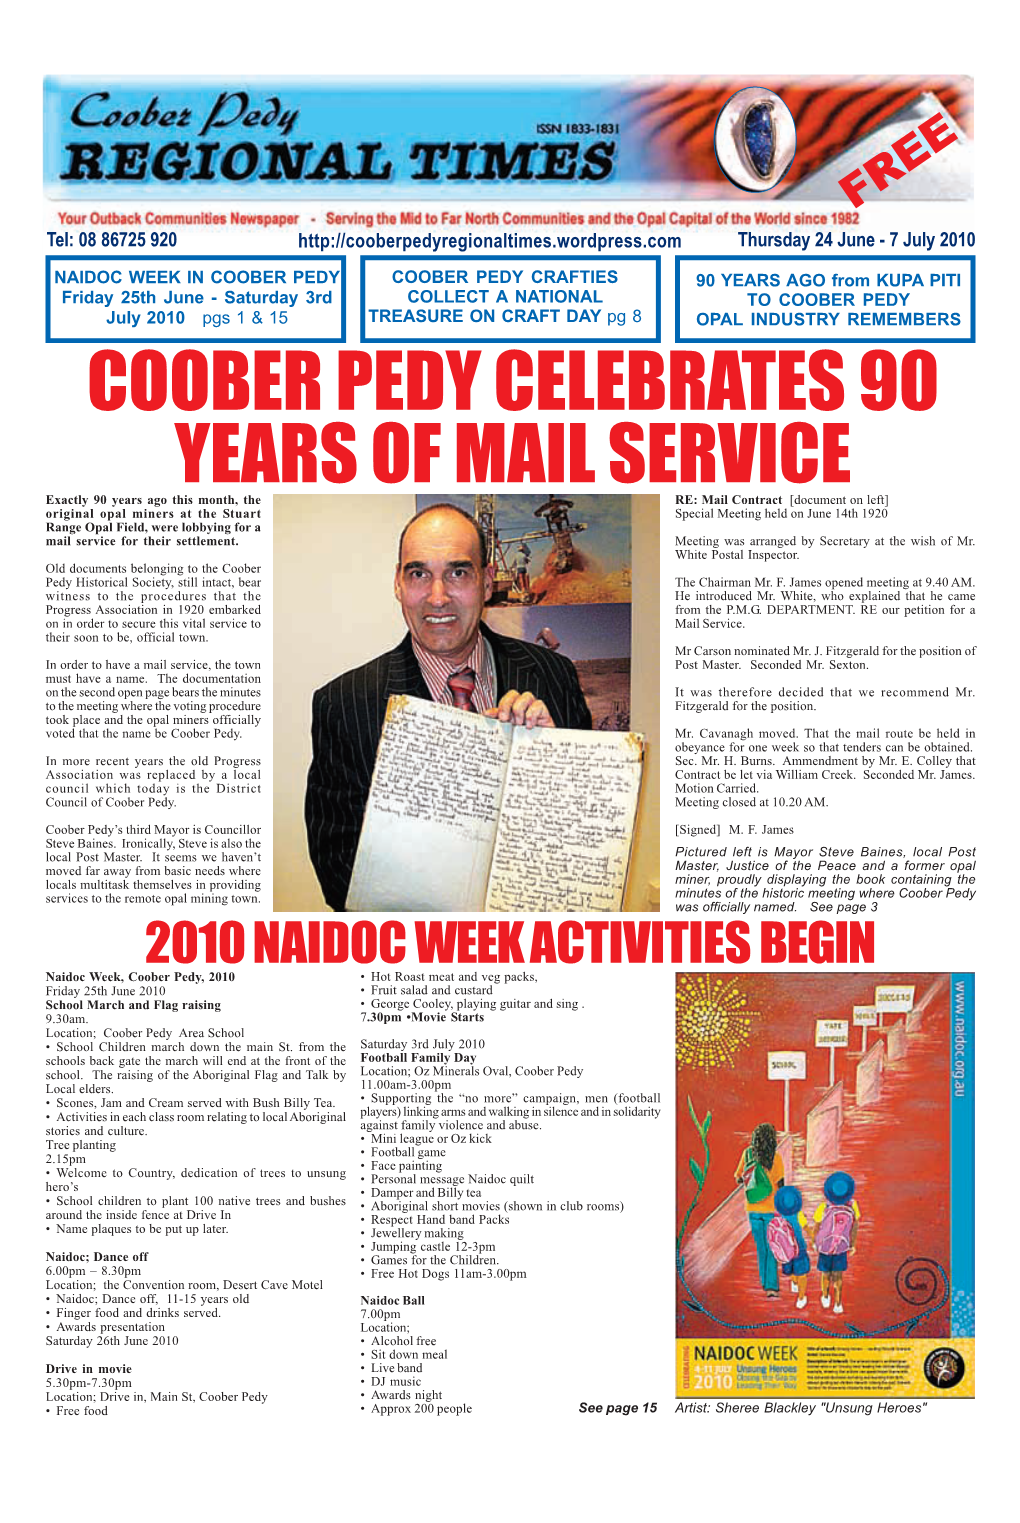 Coober Pedy Celebrates 90 Years of Mail Service